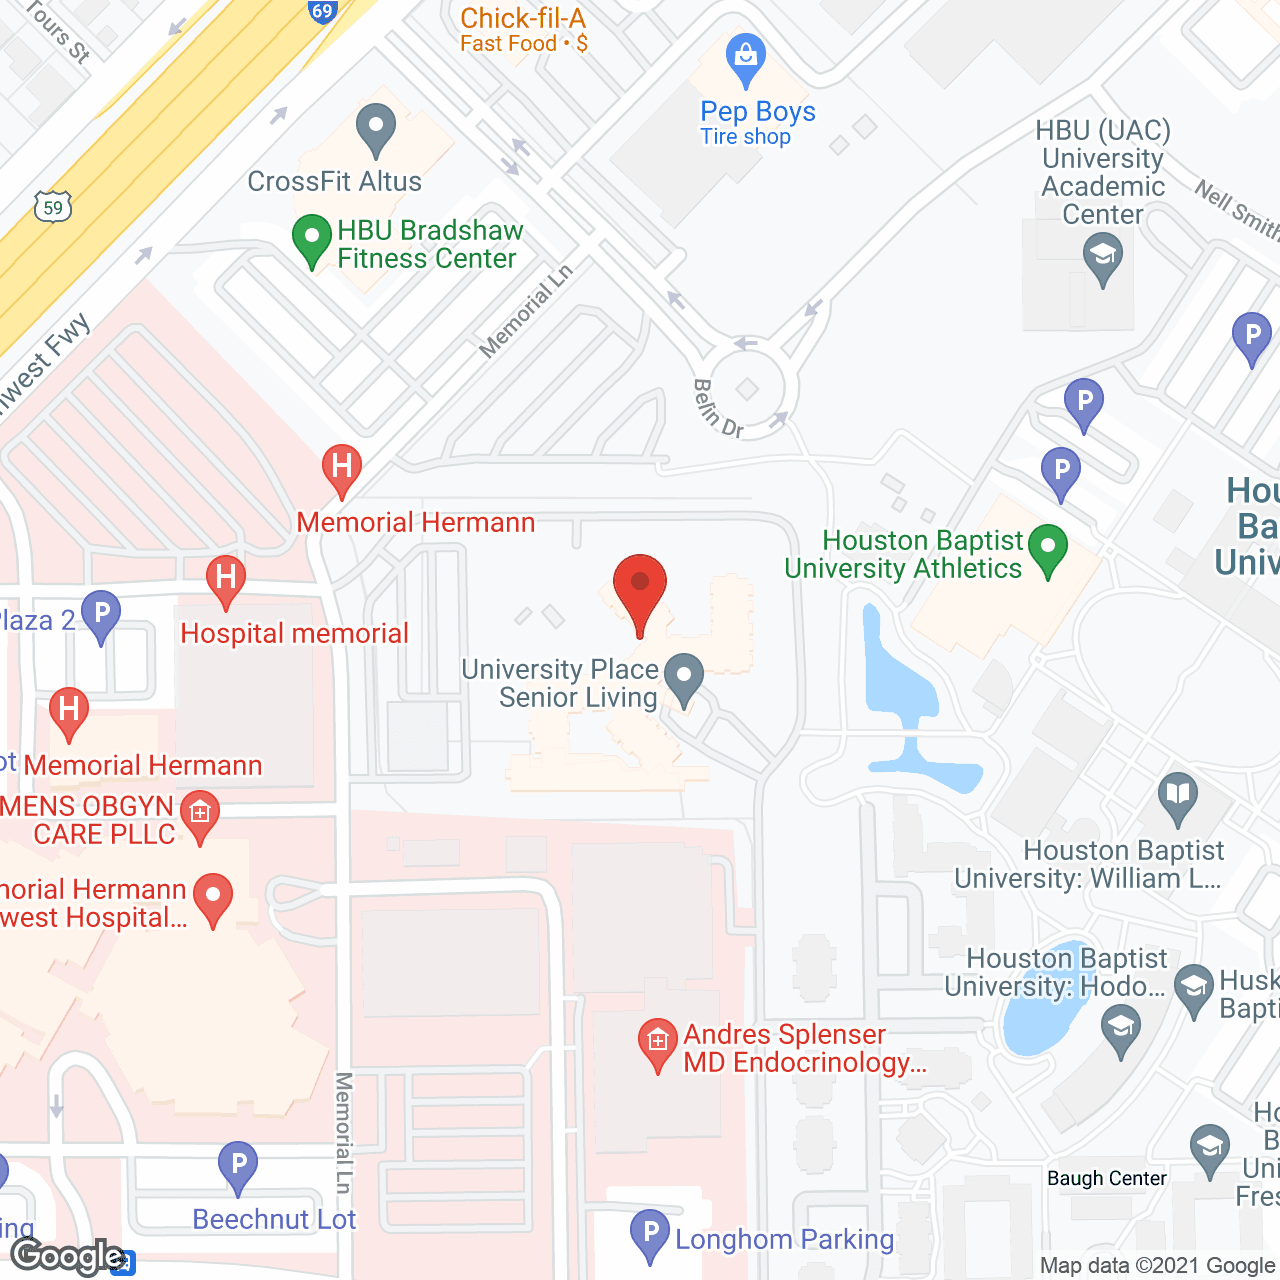 University Place in google map